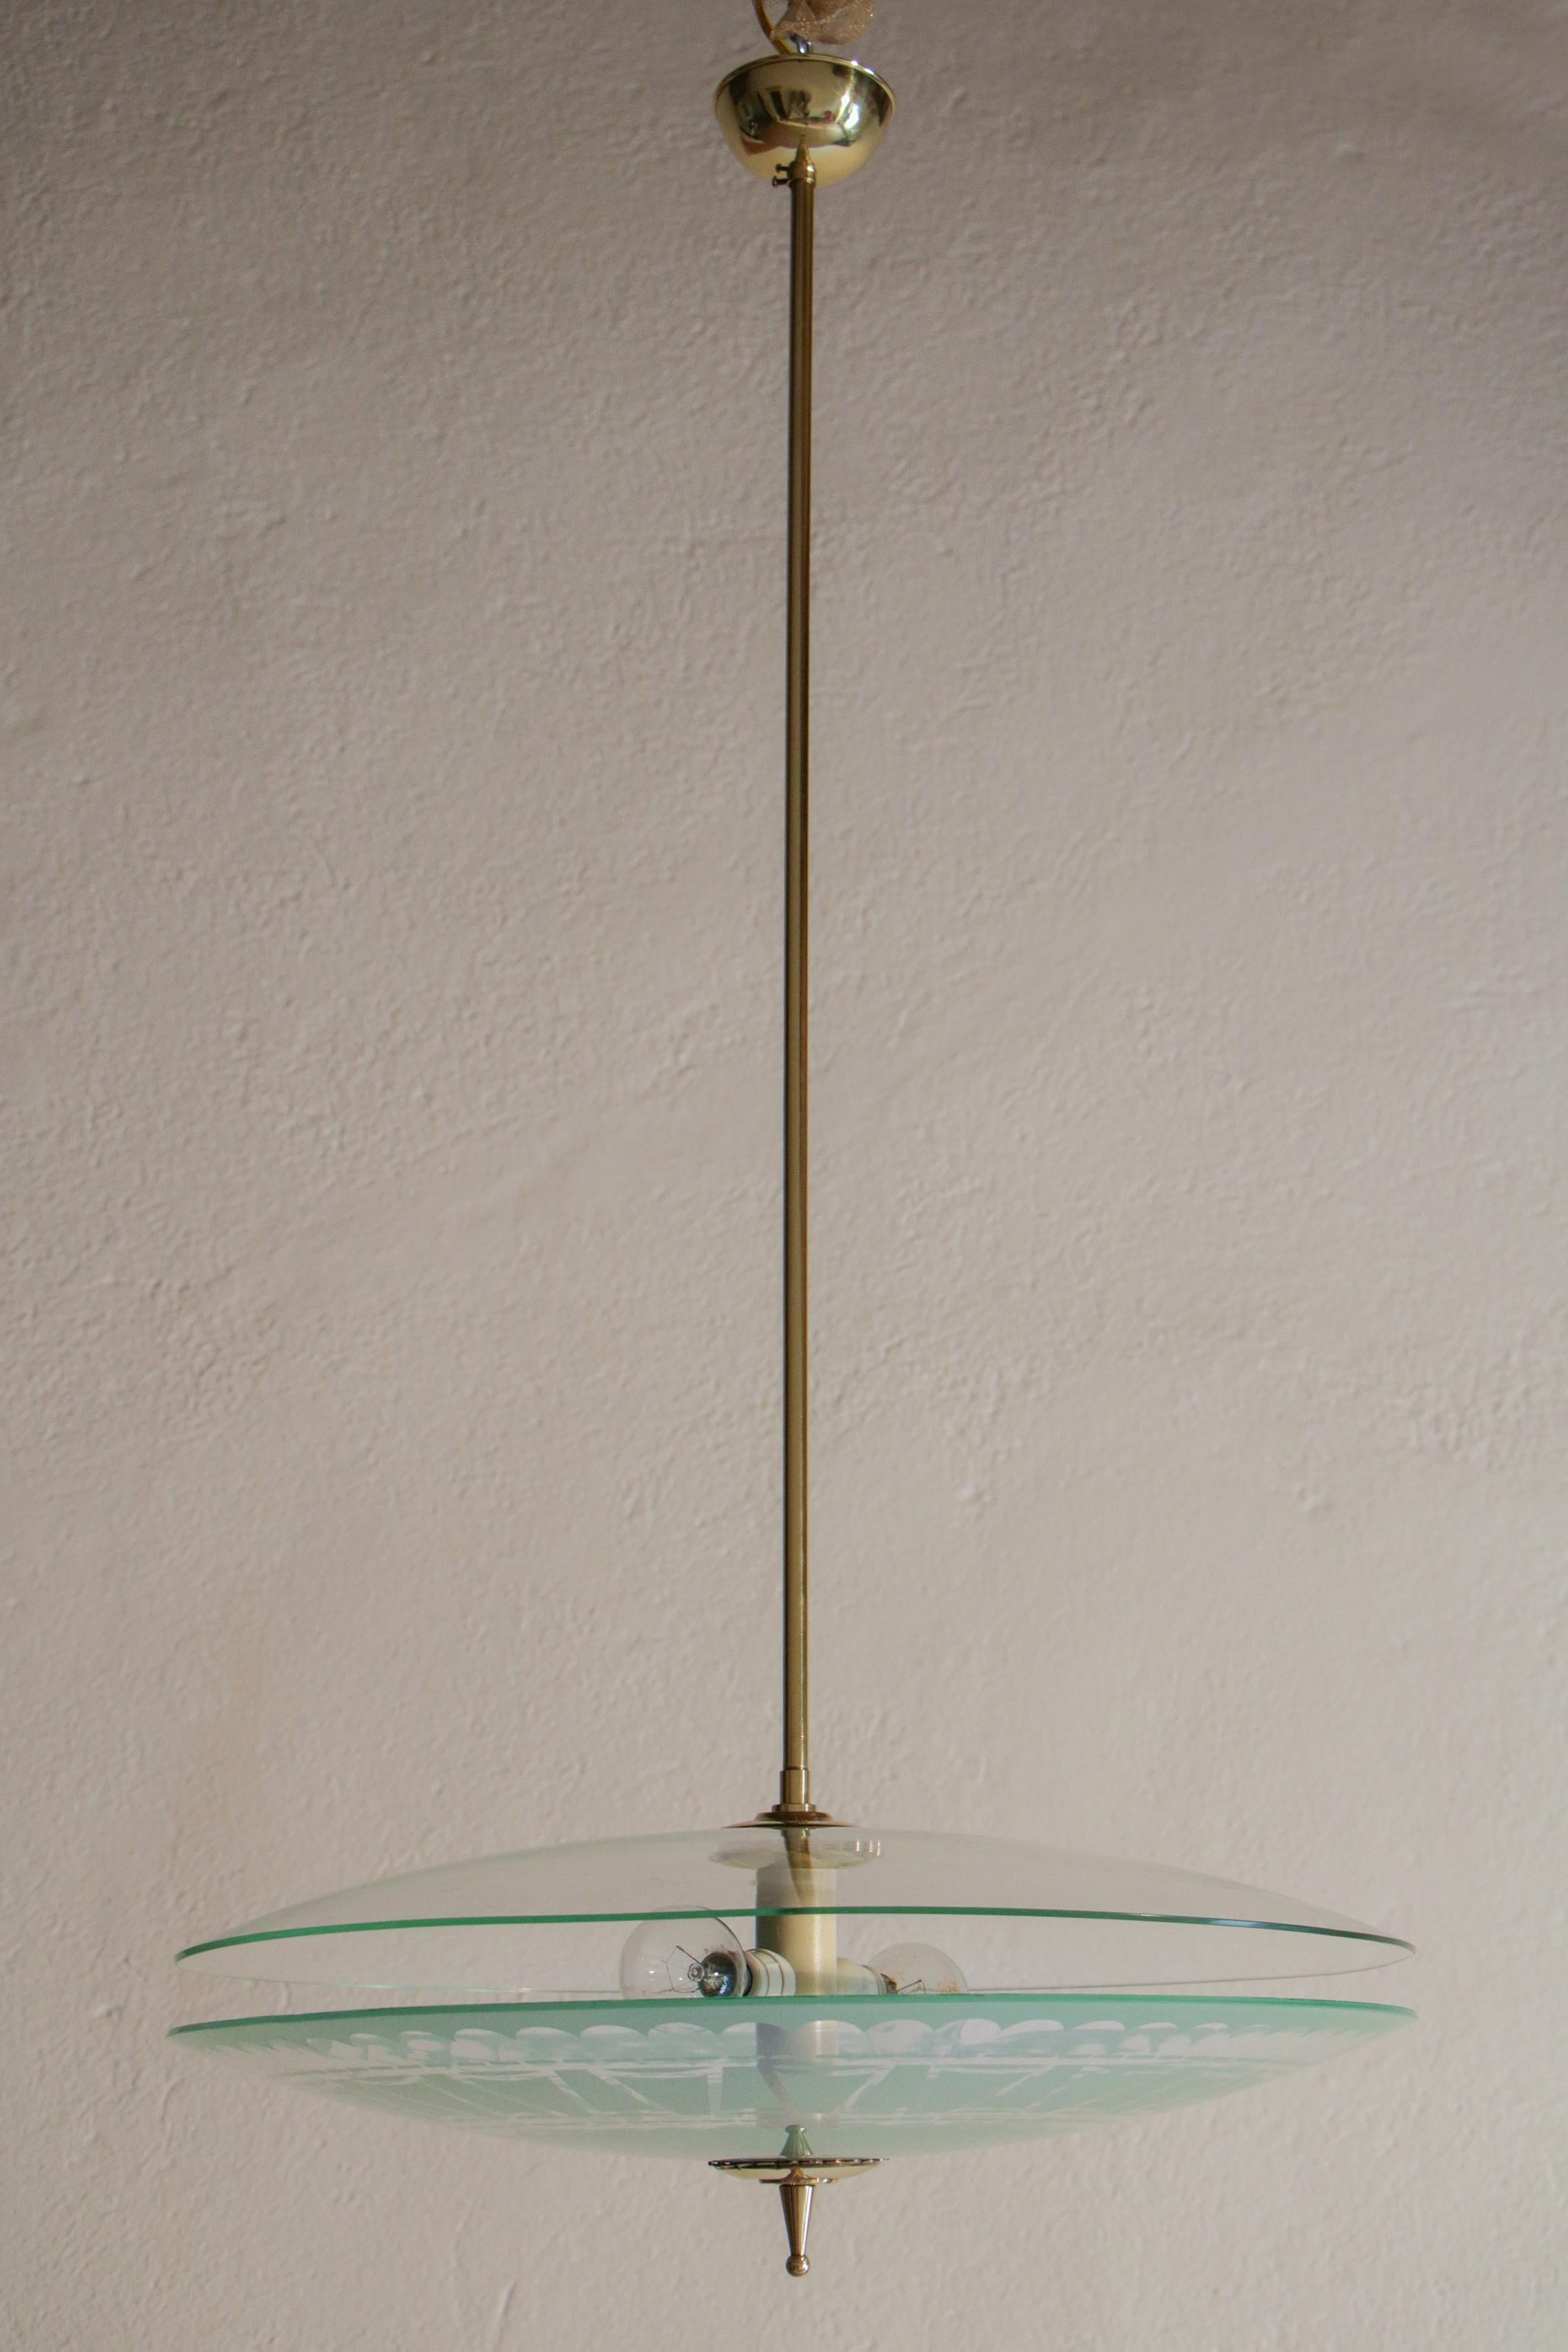 Italian Mid-Century Modern Double Disc Decorated Glass Pendant Lamp, 1950s In Good Condition For Sale In Traversetolo, IT